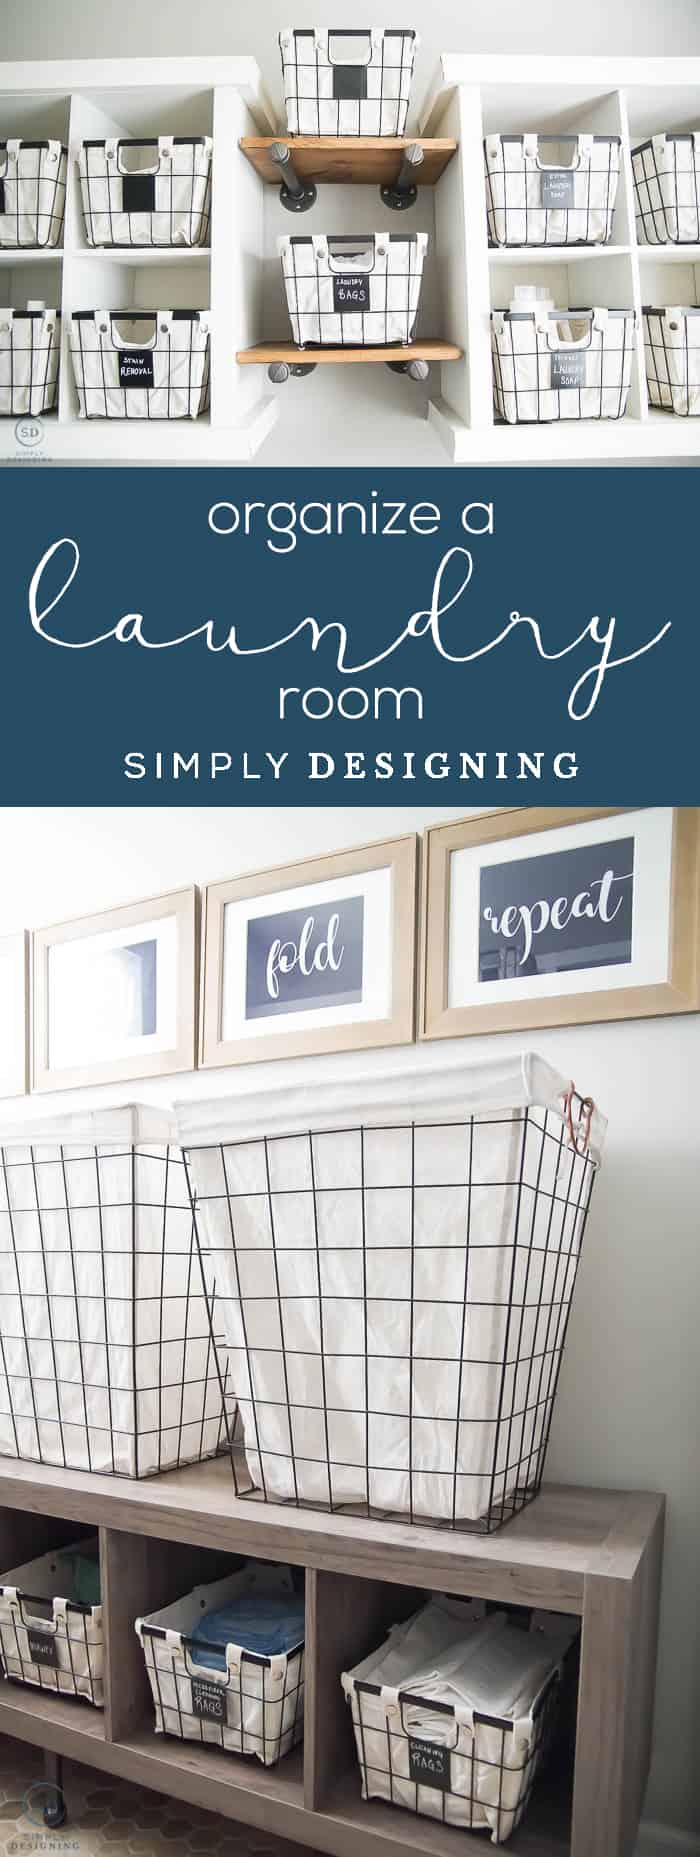 How to Organize a Laundry Room - Laundry Room Makeover